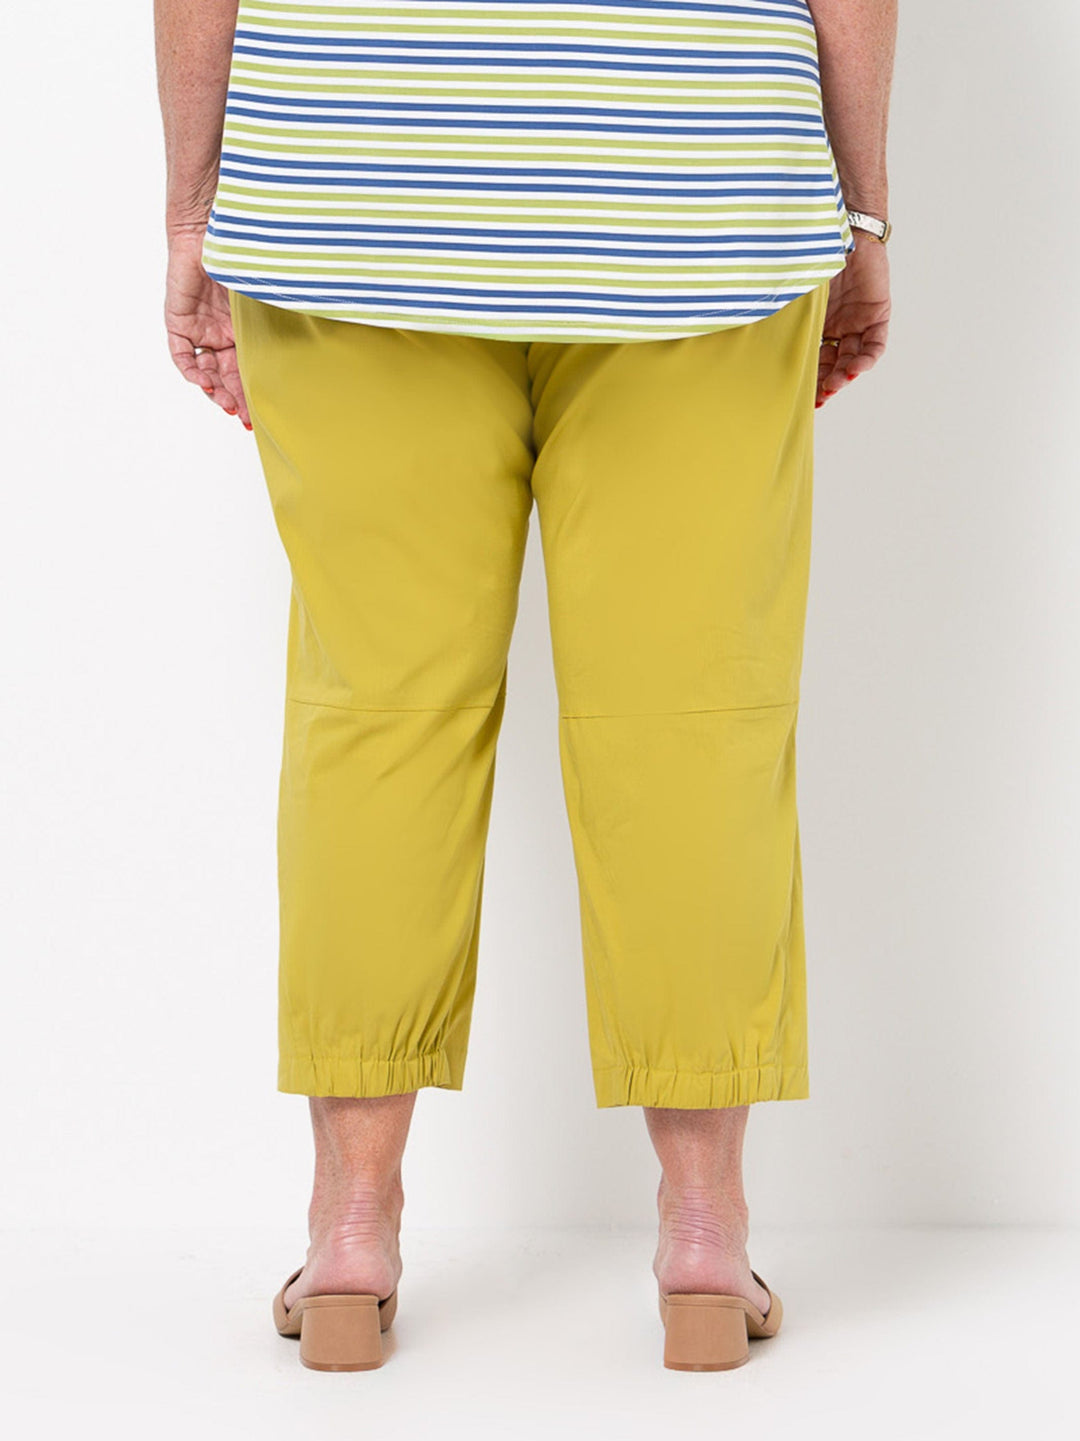 Avocado City Tucked Ankle Pant